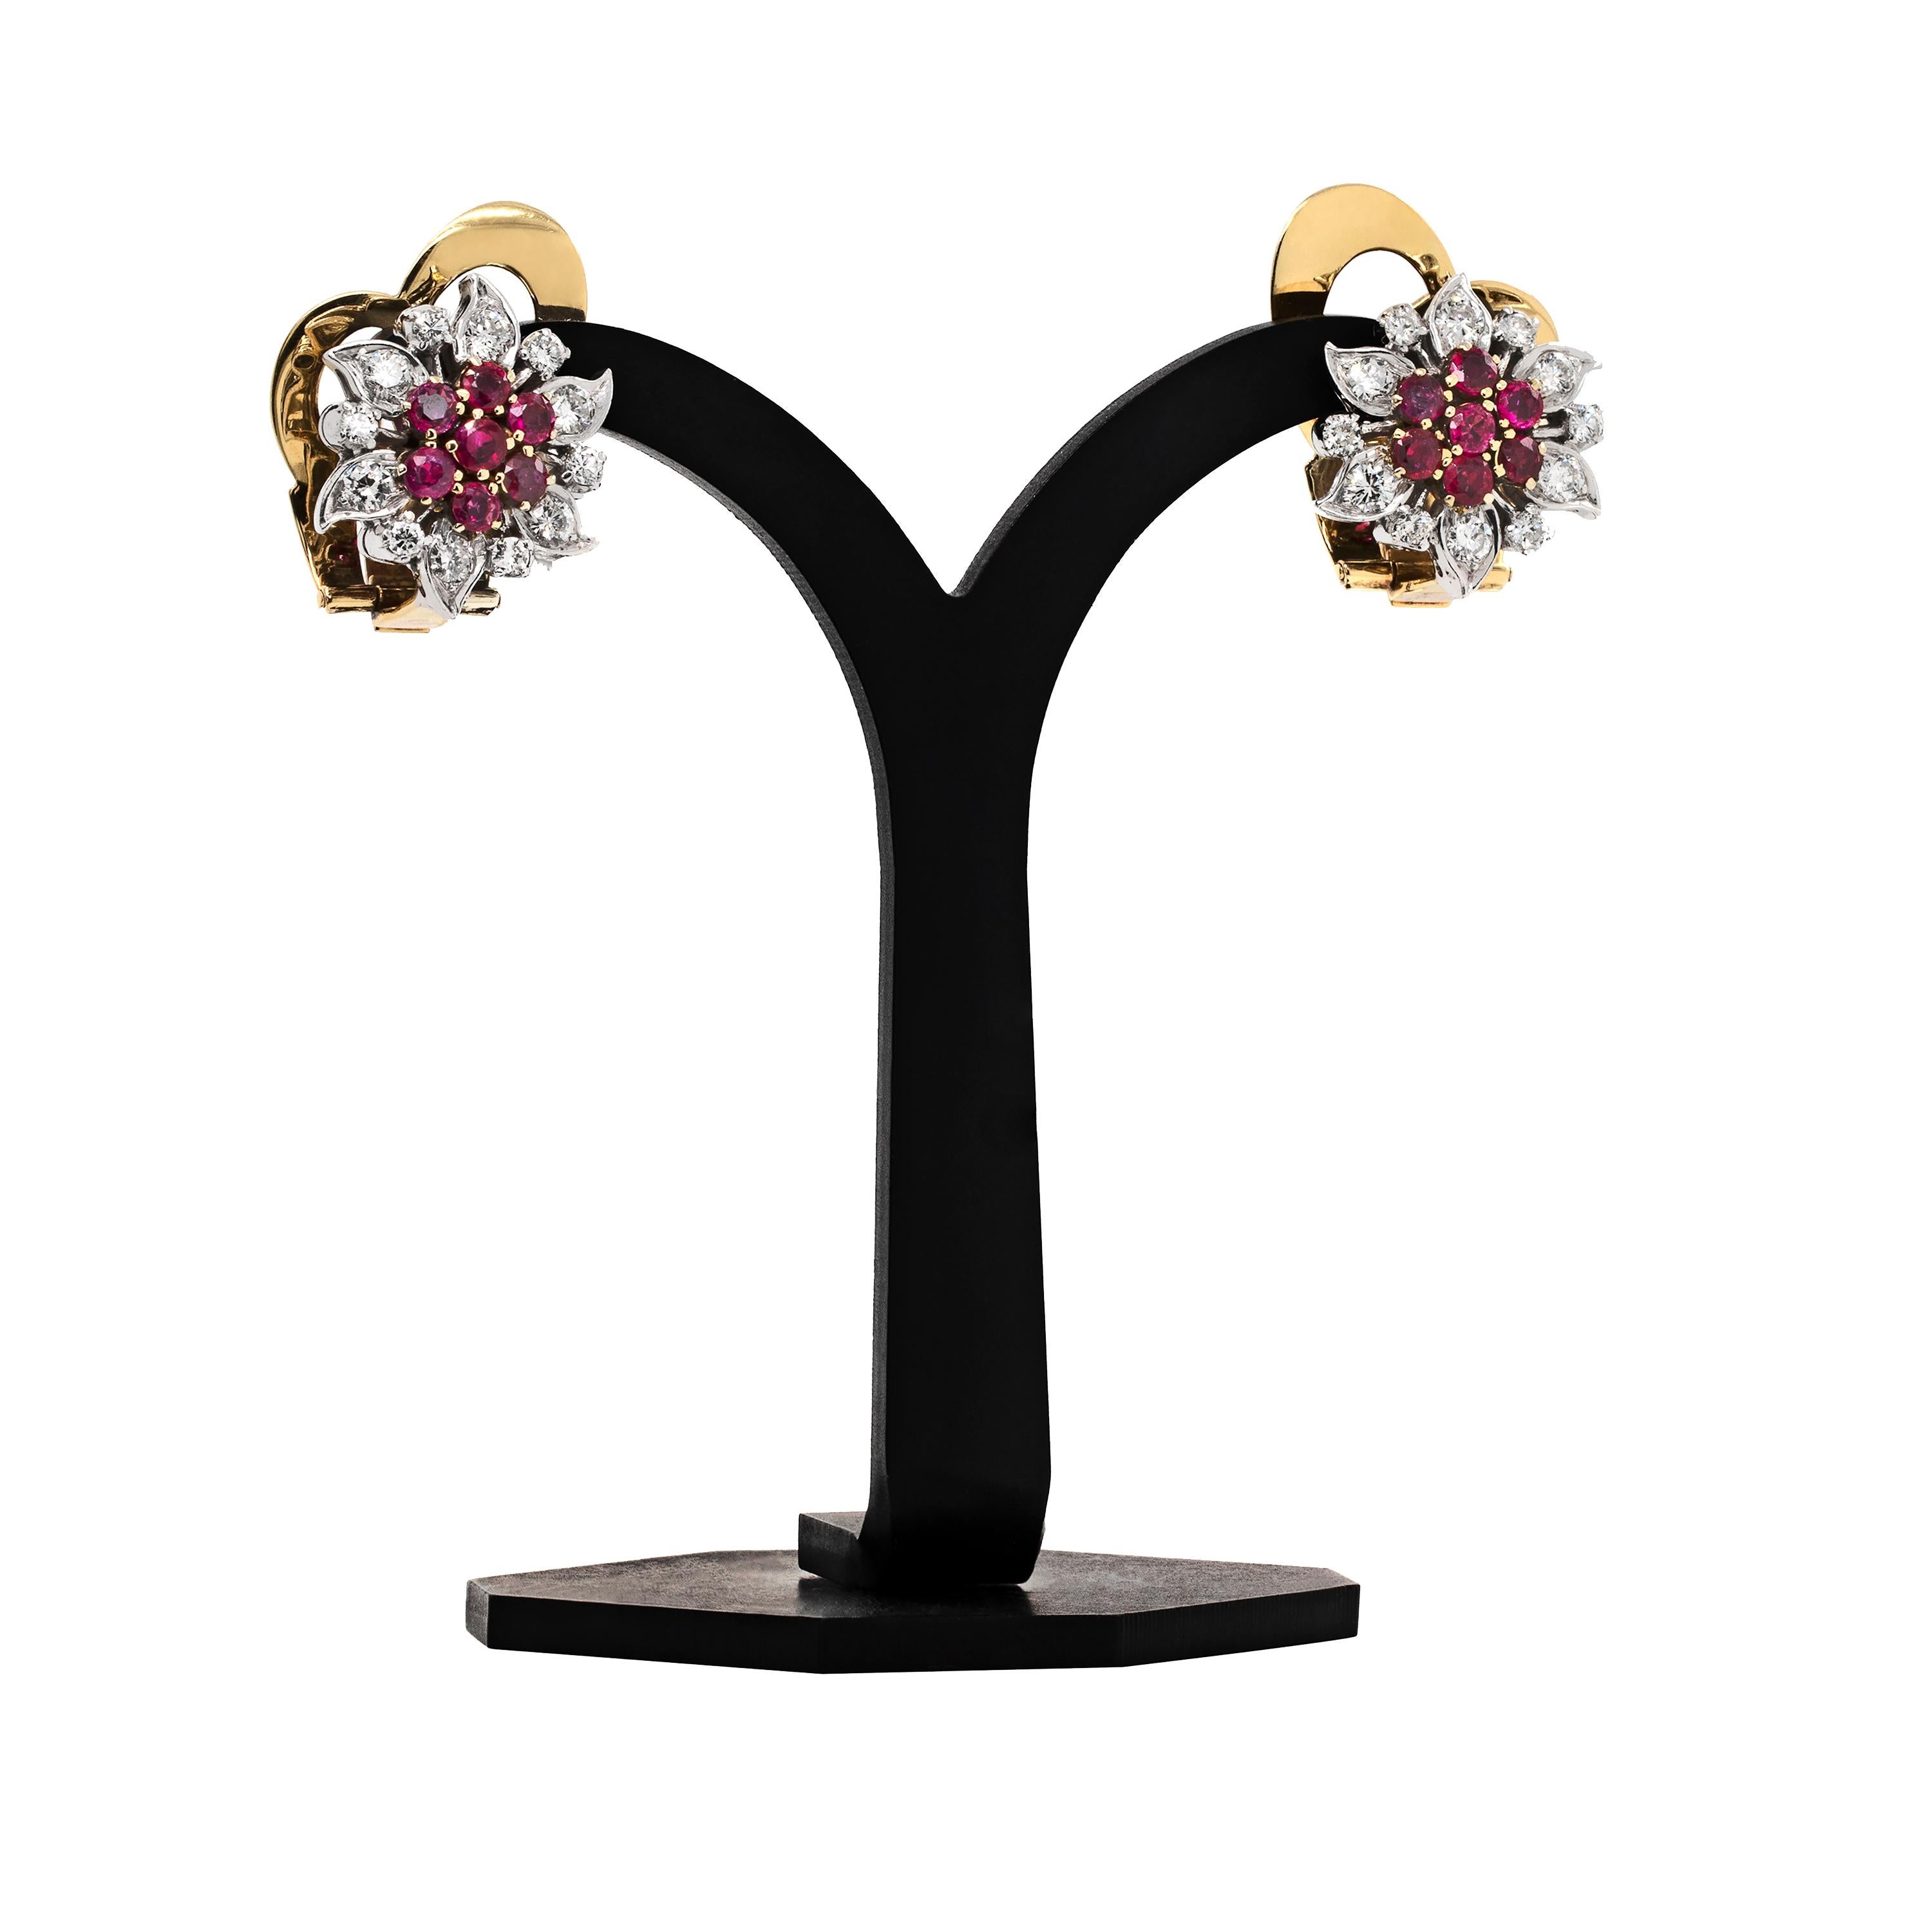 These beautiful vintage earrings feature seven round shaped vibrant rubies in the centre, weighing a total approximate weight of 1.20ct, all mounted in open back, 18 carat yellow gold four claw settings. To complete the floral design of these